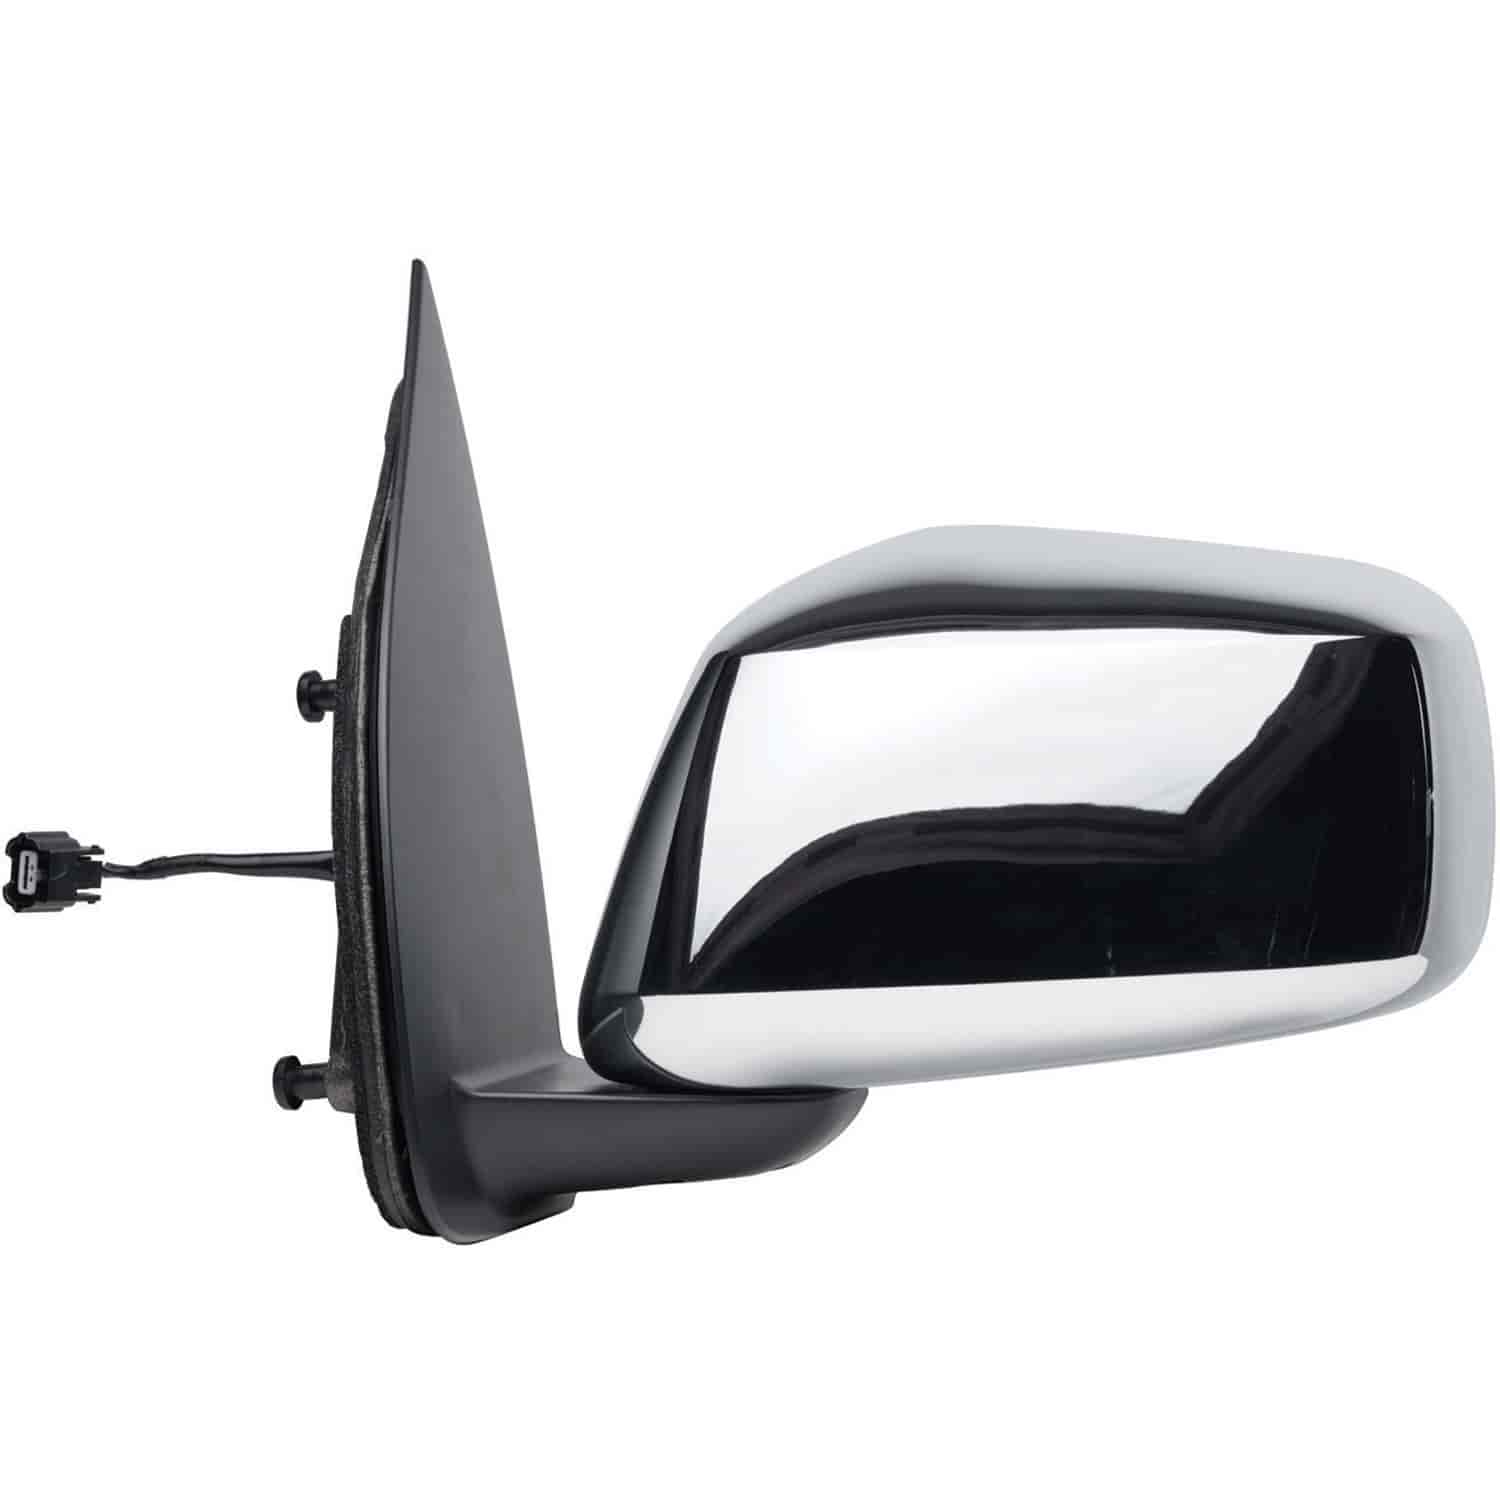 OEM Style Replacement mirror for 05-14 Nissan Frontier extended/crewcab Xterra driver side mirror te